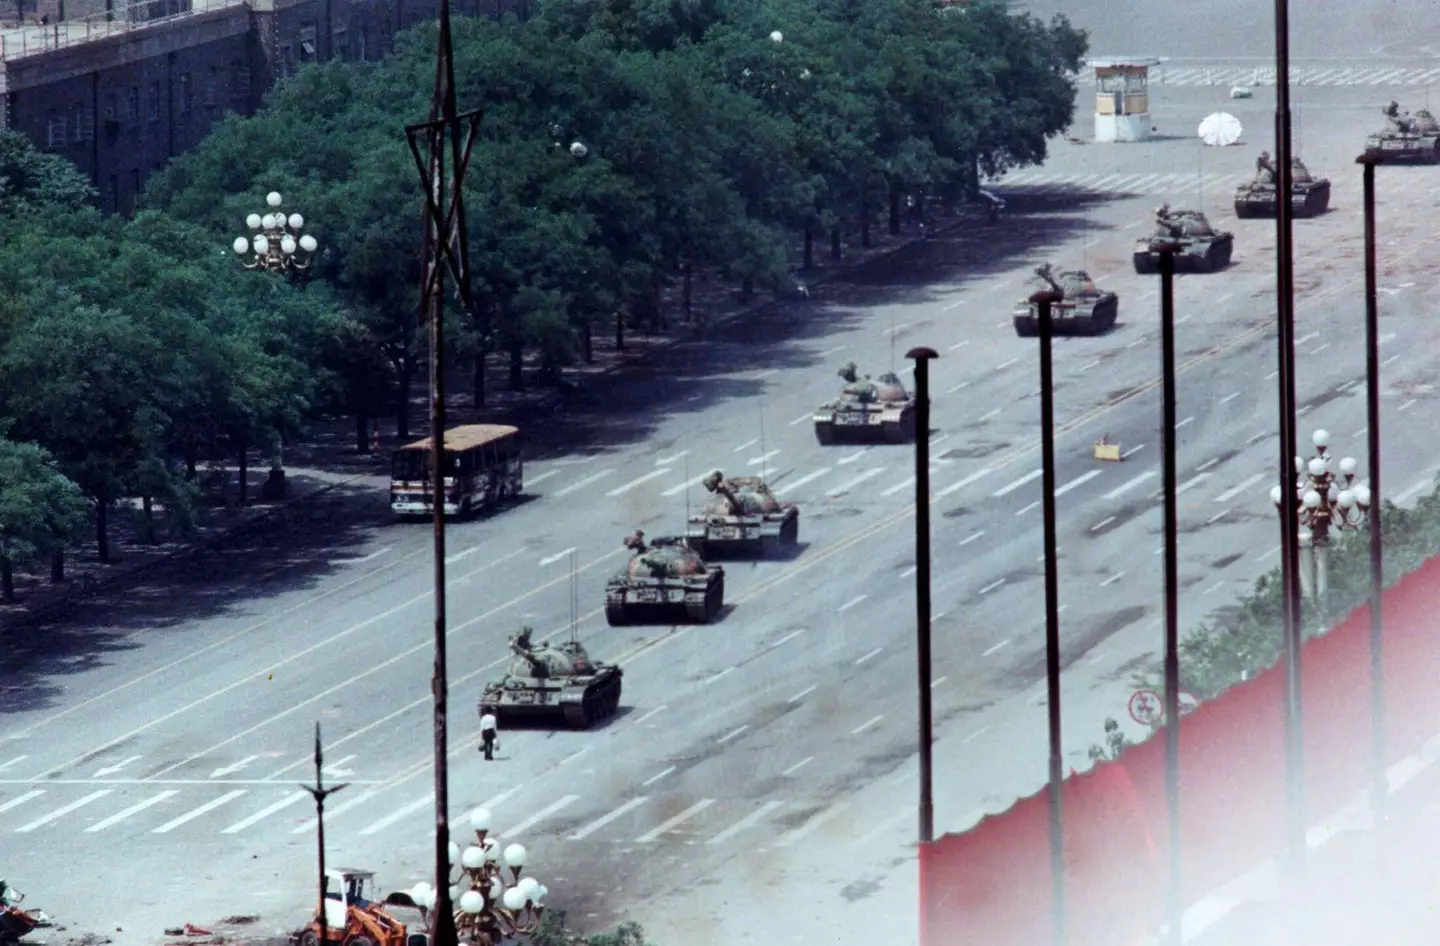 'Tank Man' standing down a line of four Chinese tanks in Beijing’s Tiananmen Square in 1989.